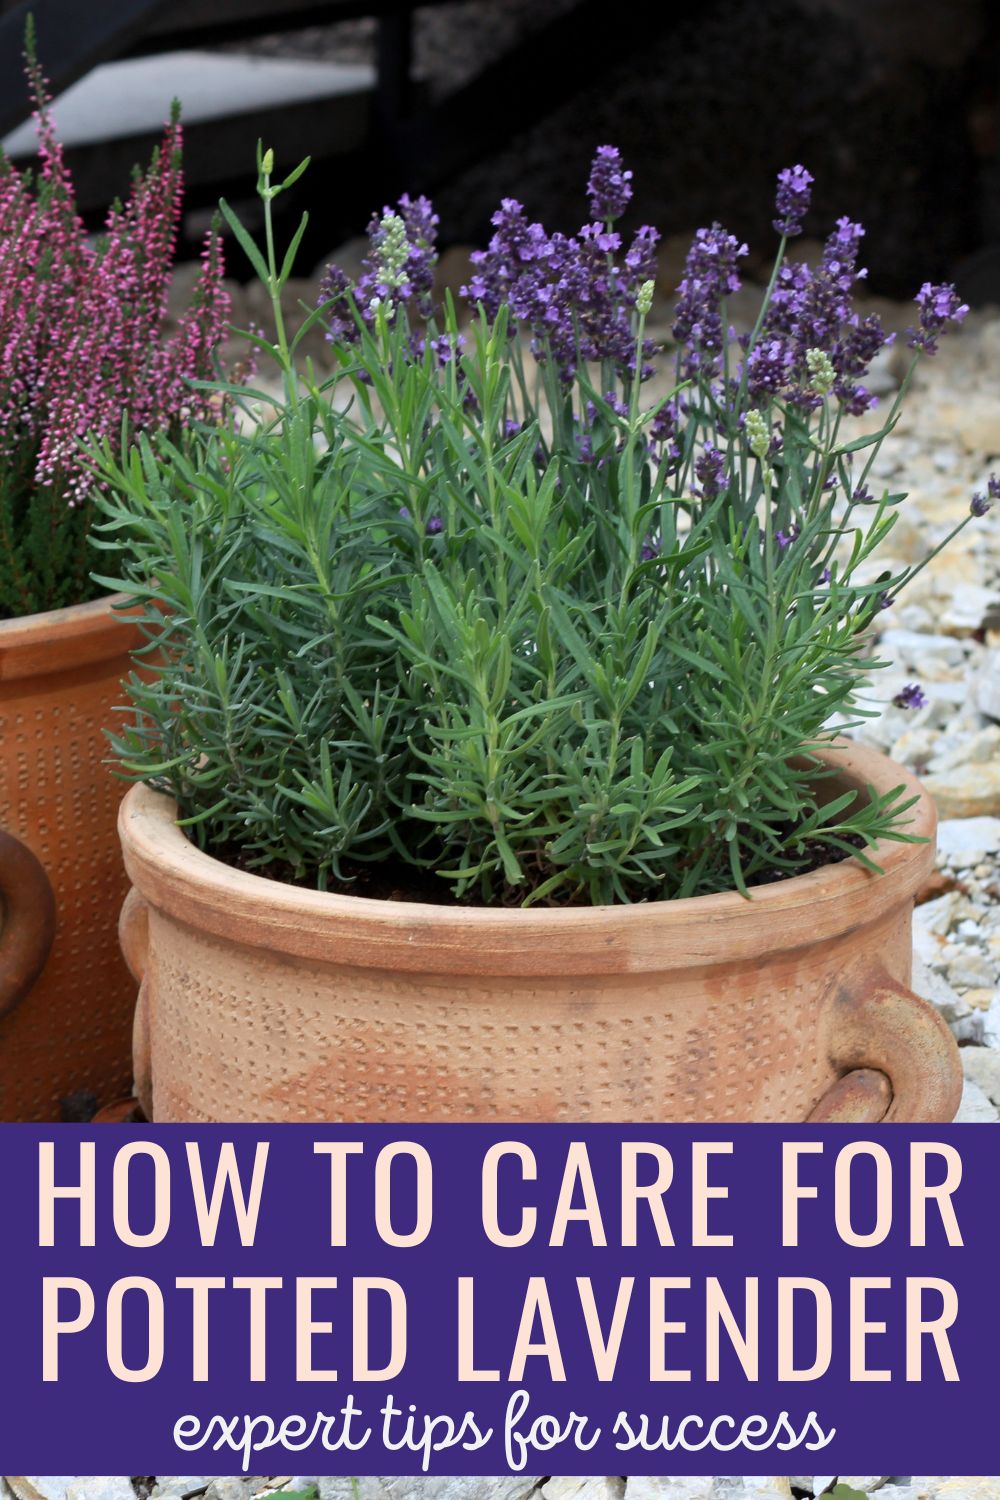 How to care for potted lavender - expert tips for success.